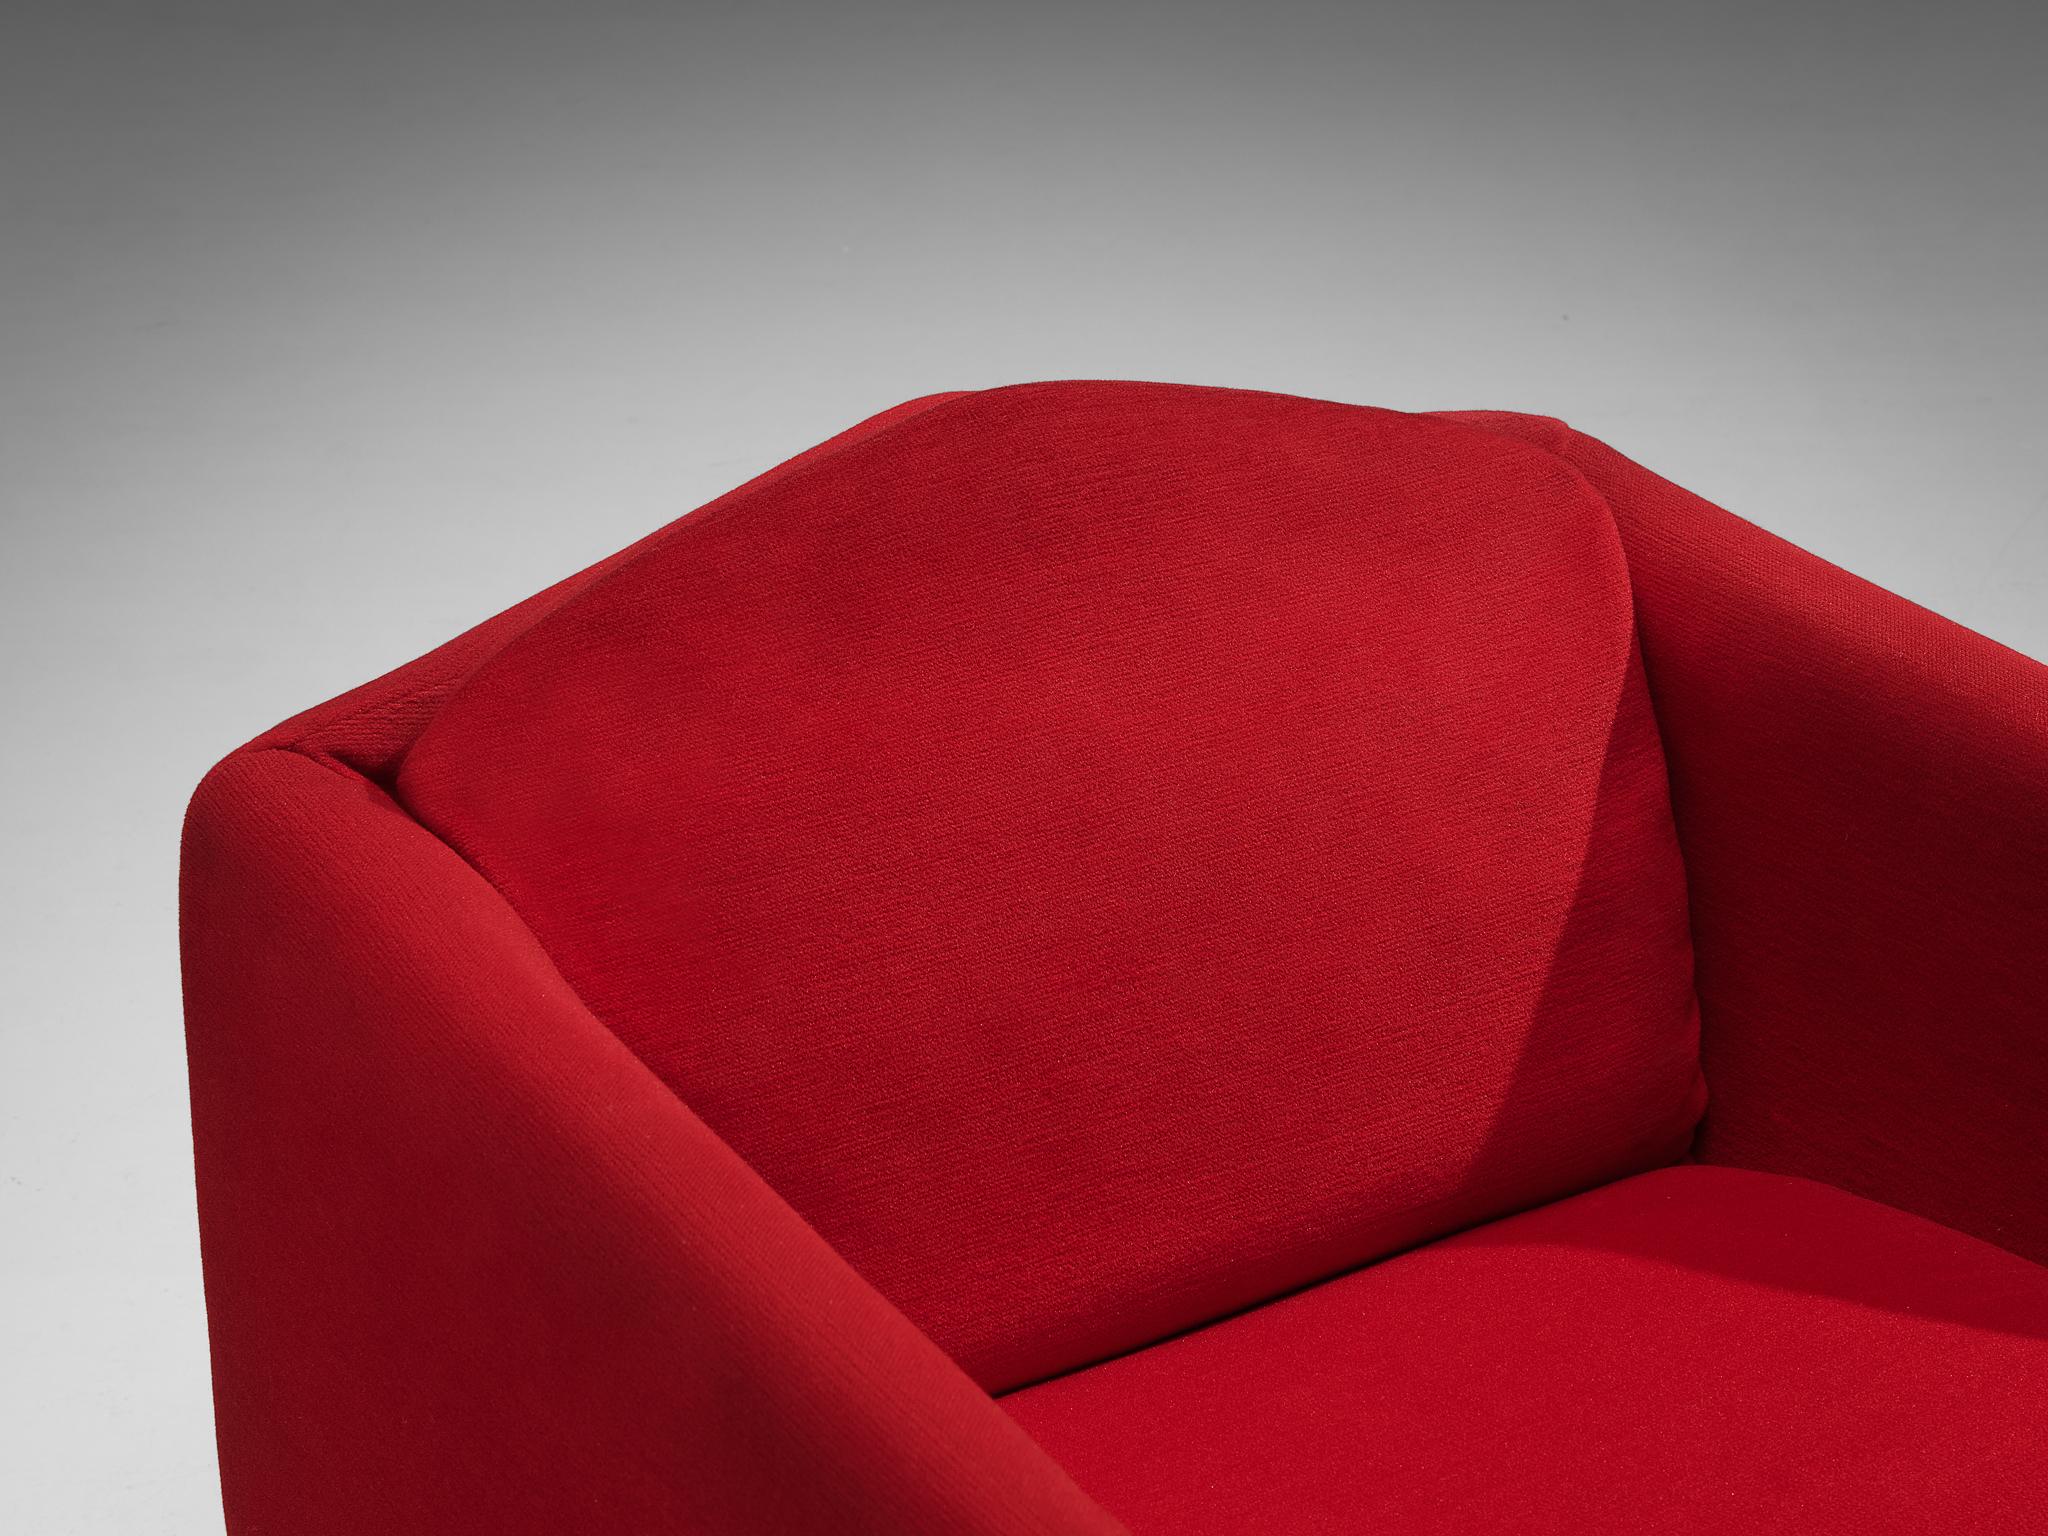 Pierre Guariche for Burov Pair of 'Monaco' Lounge Chairs in Red Velvet 1